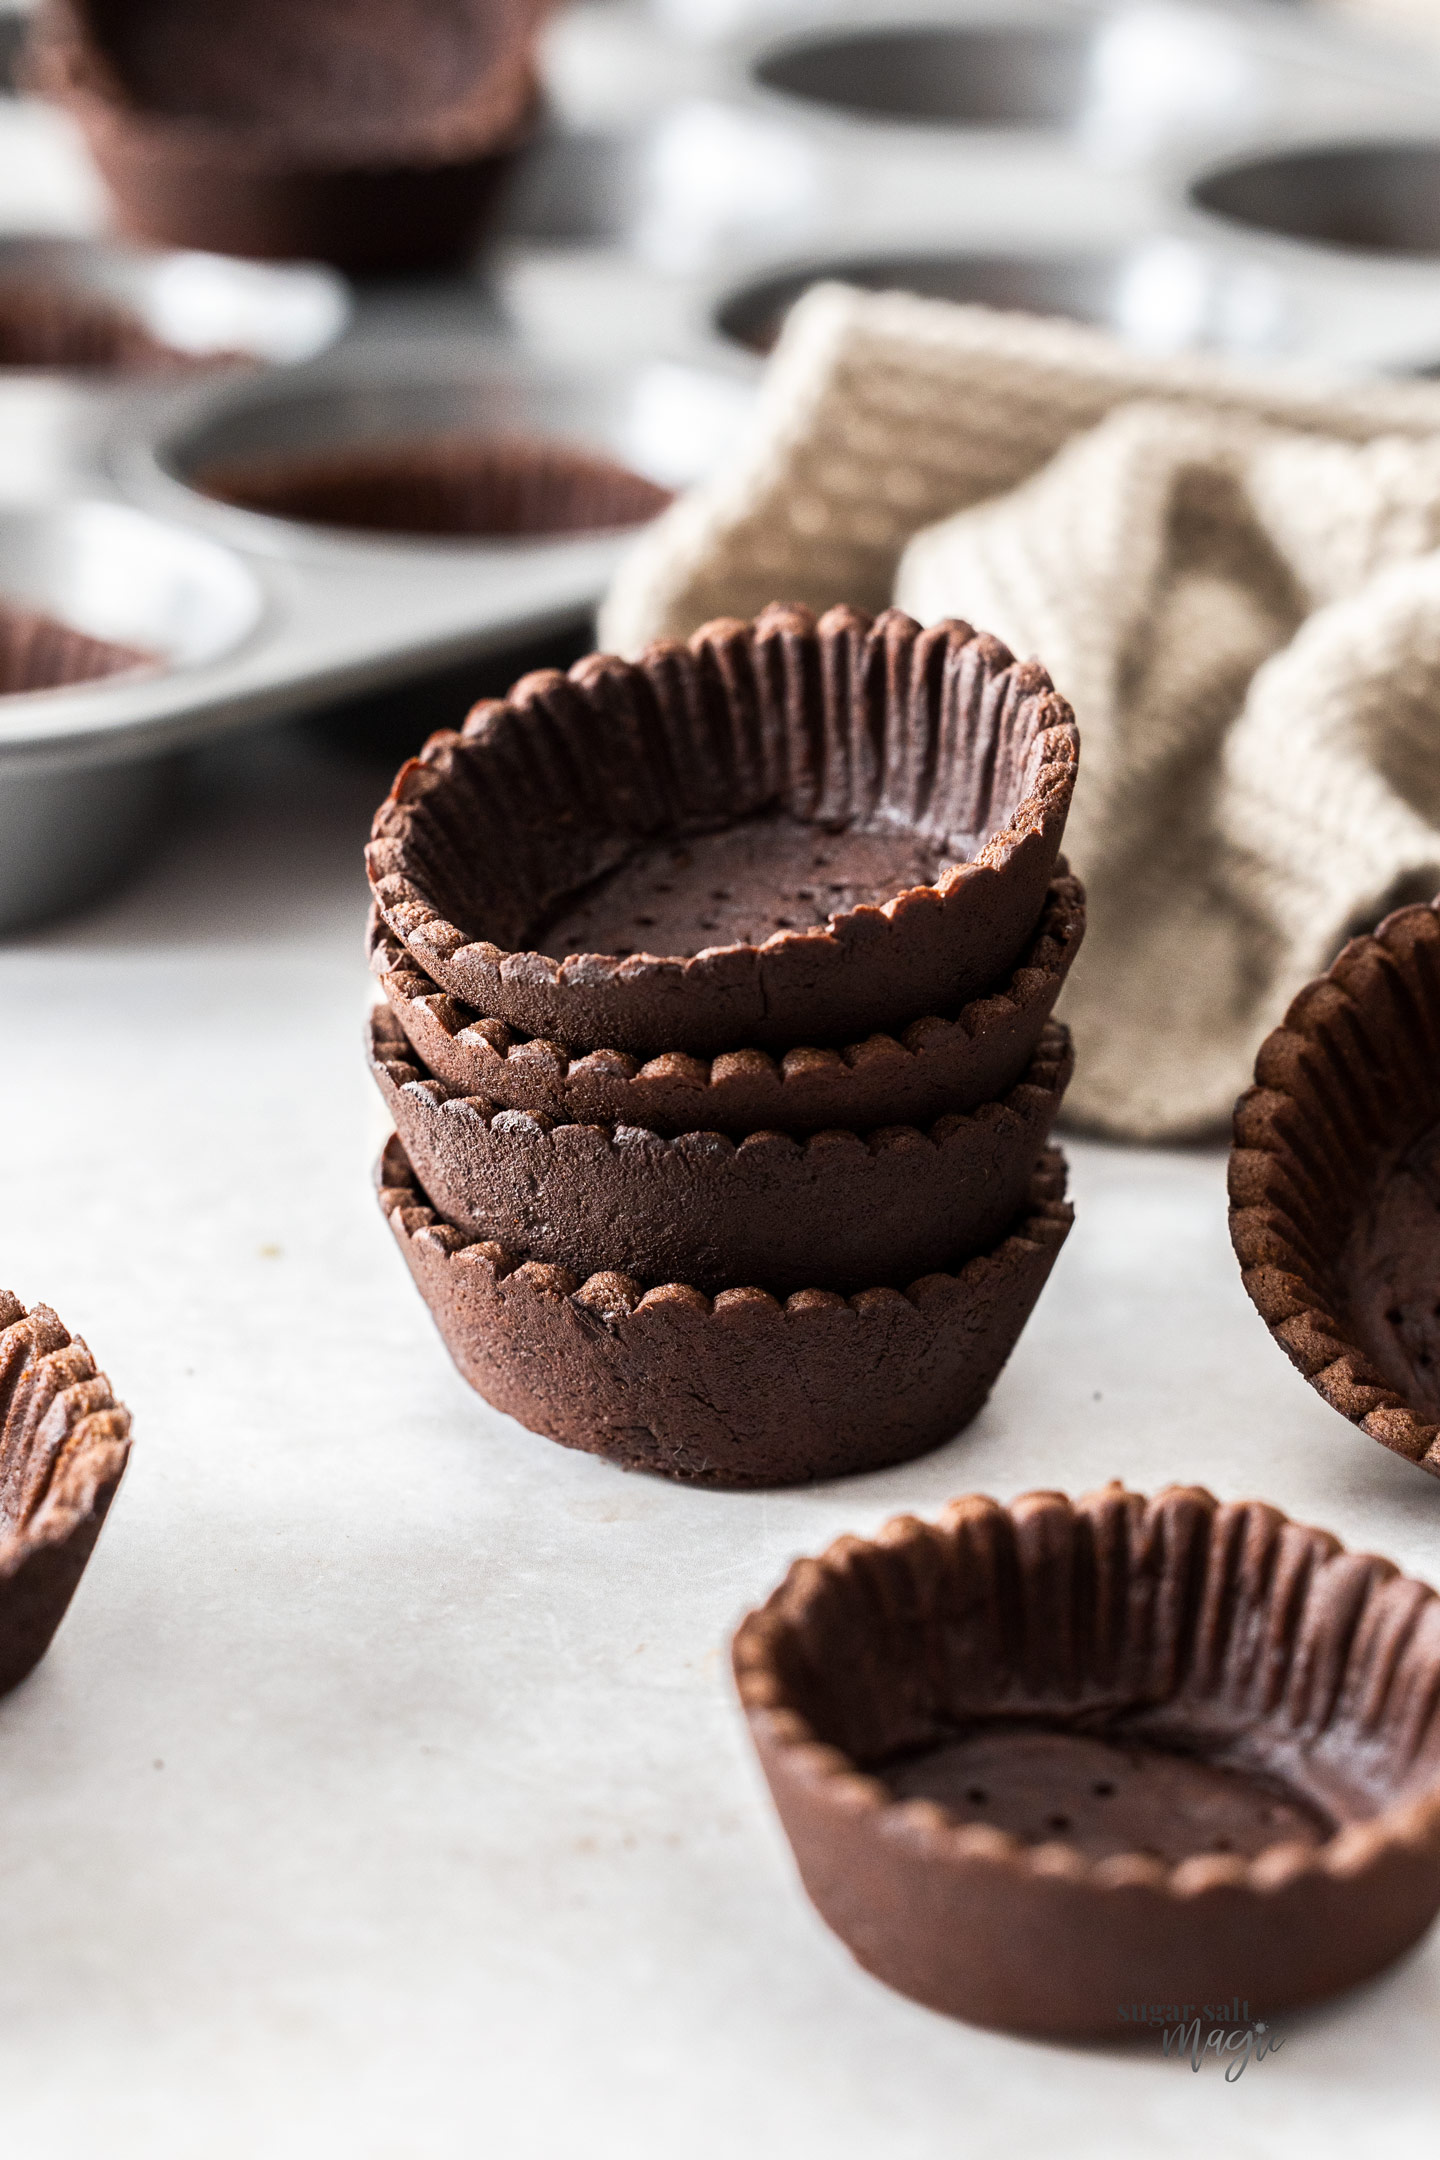 A stack of 4 chocolate tartlet shells.